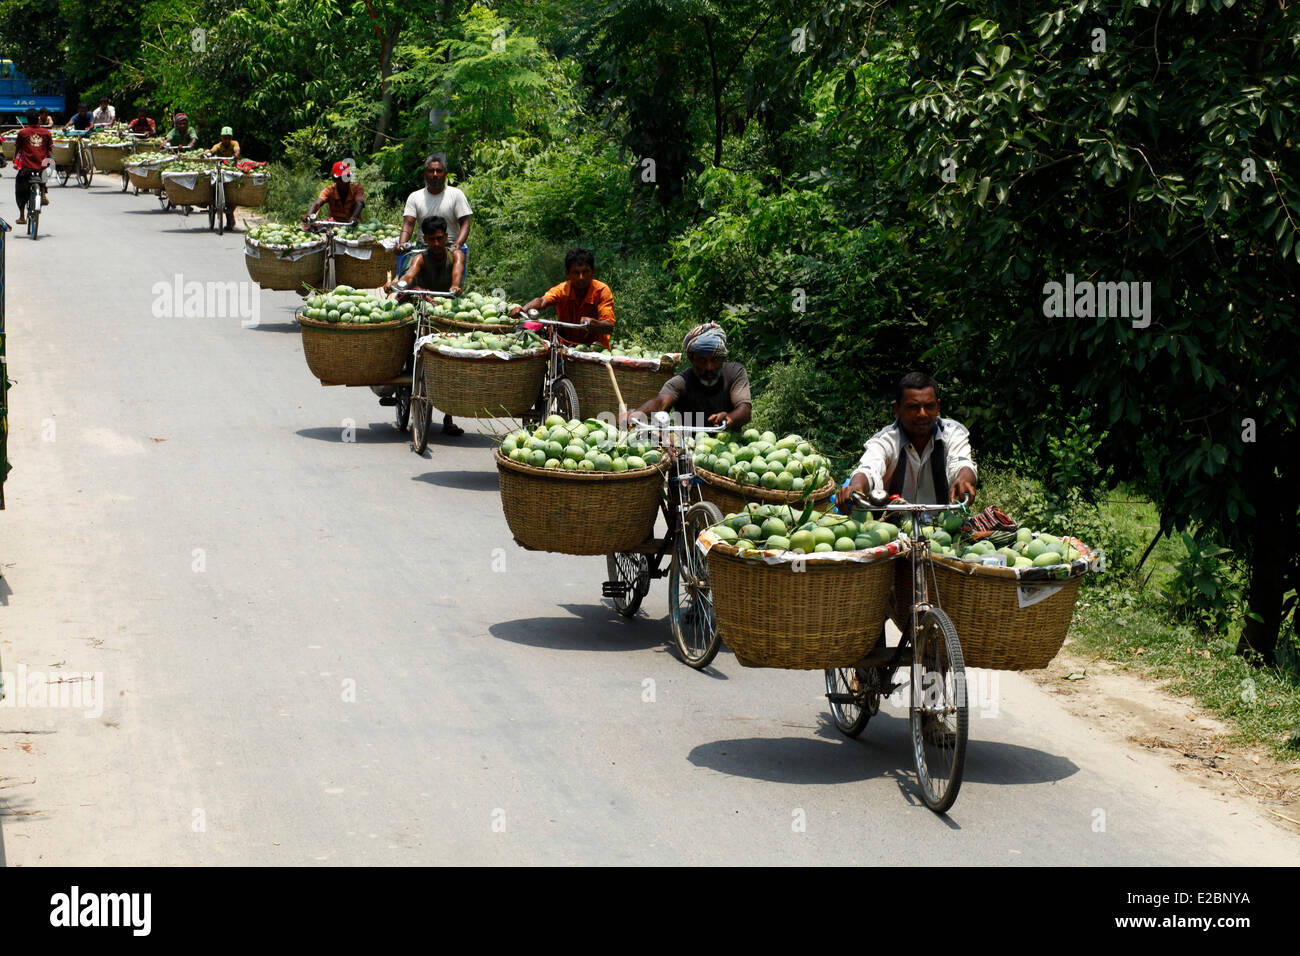 Chapainawabganj, Bangladesh, 17th June, 2014. People carrying mango from garden to mango market for sale in Bangladesh. Bangladesh generally produces about 800,000 metric tons of mangoes on 51,000 hectors of land. Chapainawabganj alone produces almost 200,000 tons of mangoes on 23,282 hectares of land. Credit:  zakir hossain chowdhury zakir/Alamy Live News Stock Photo